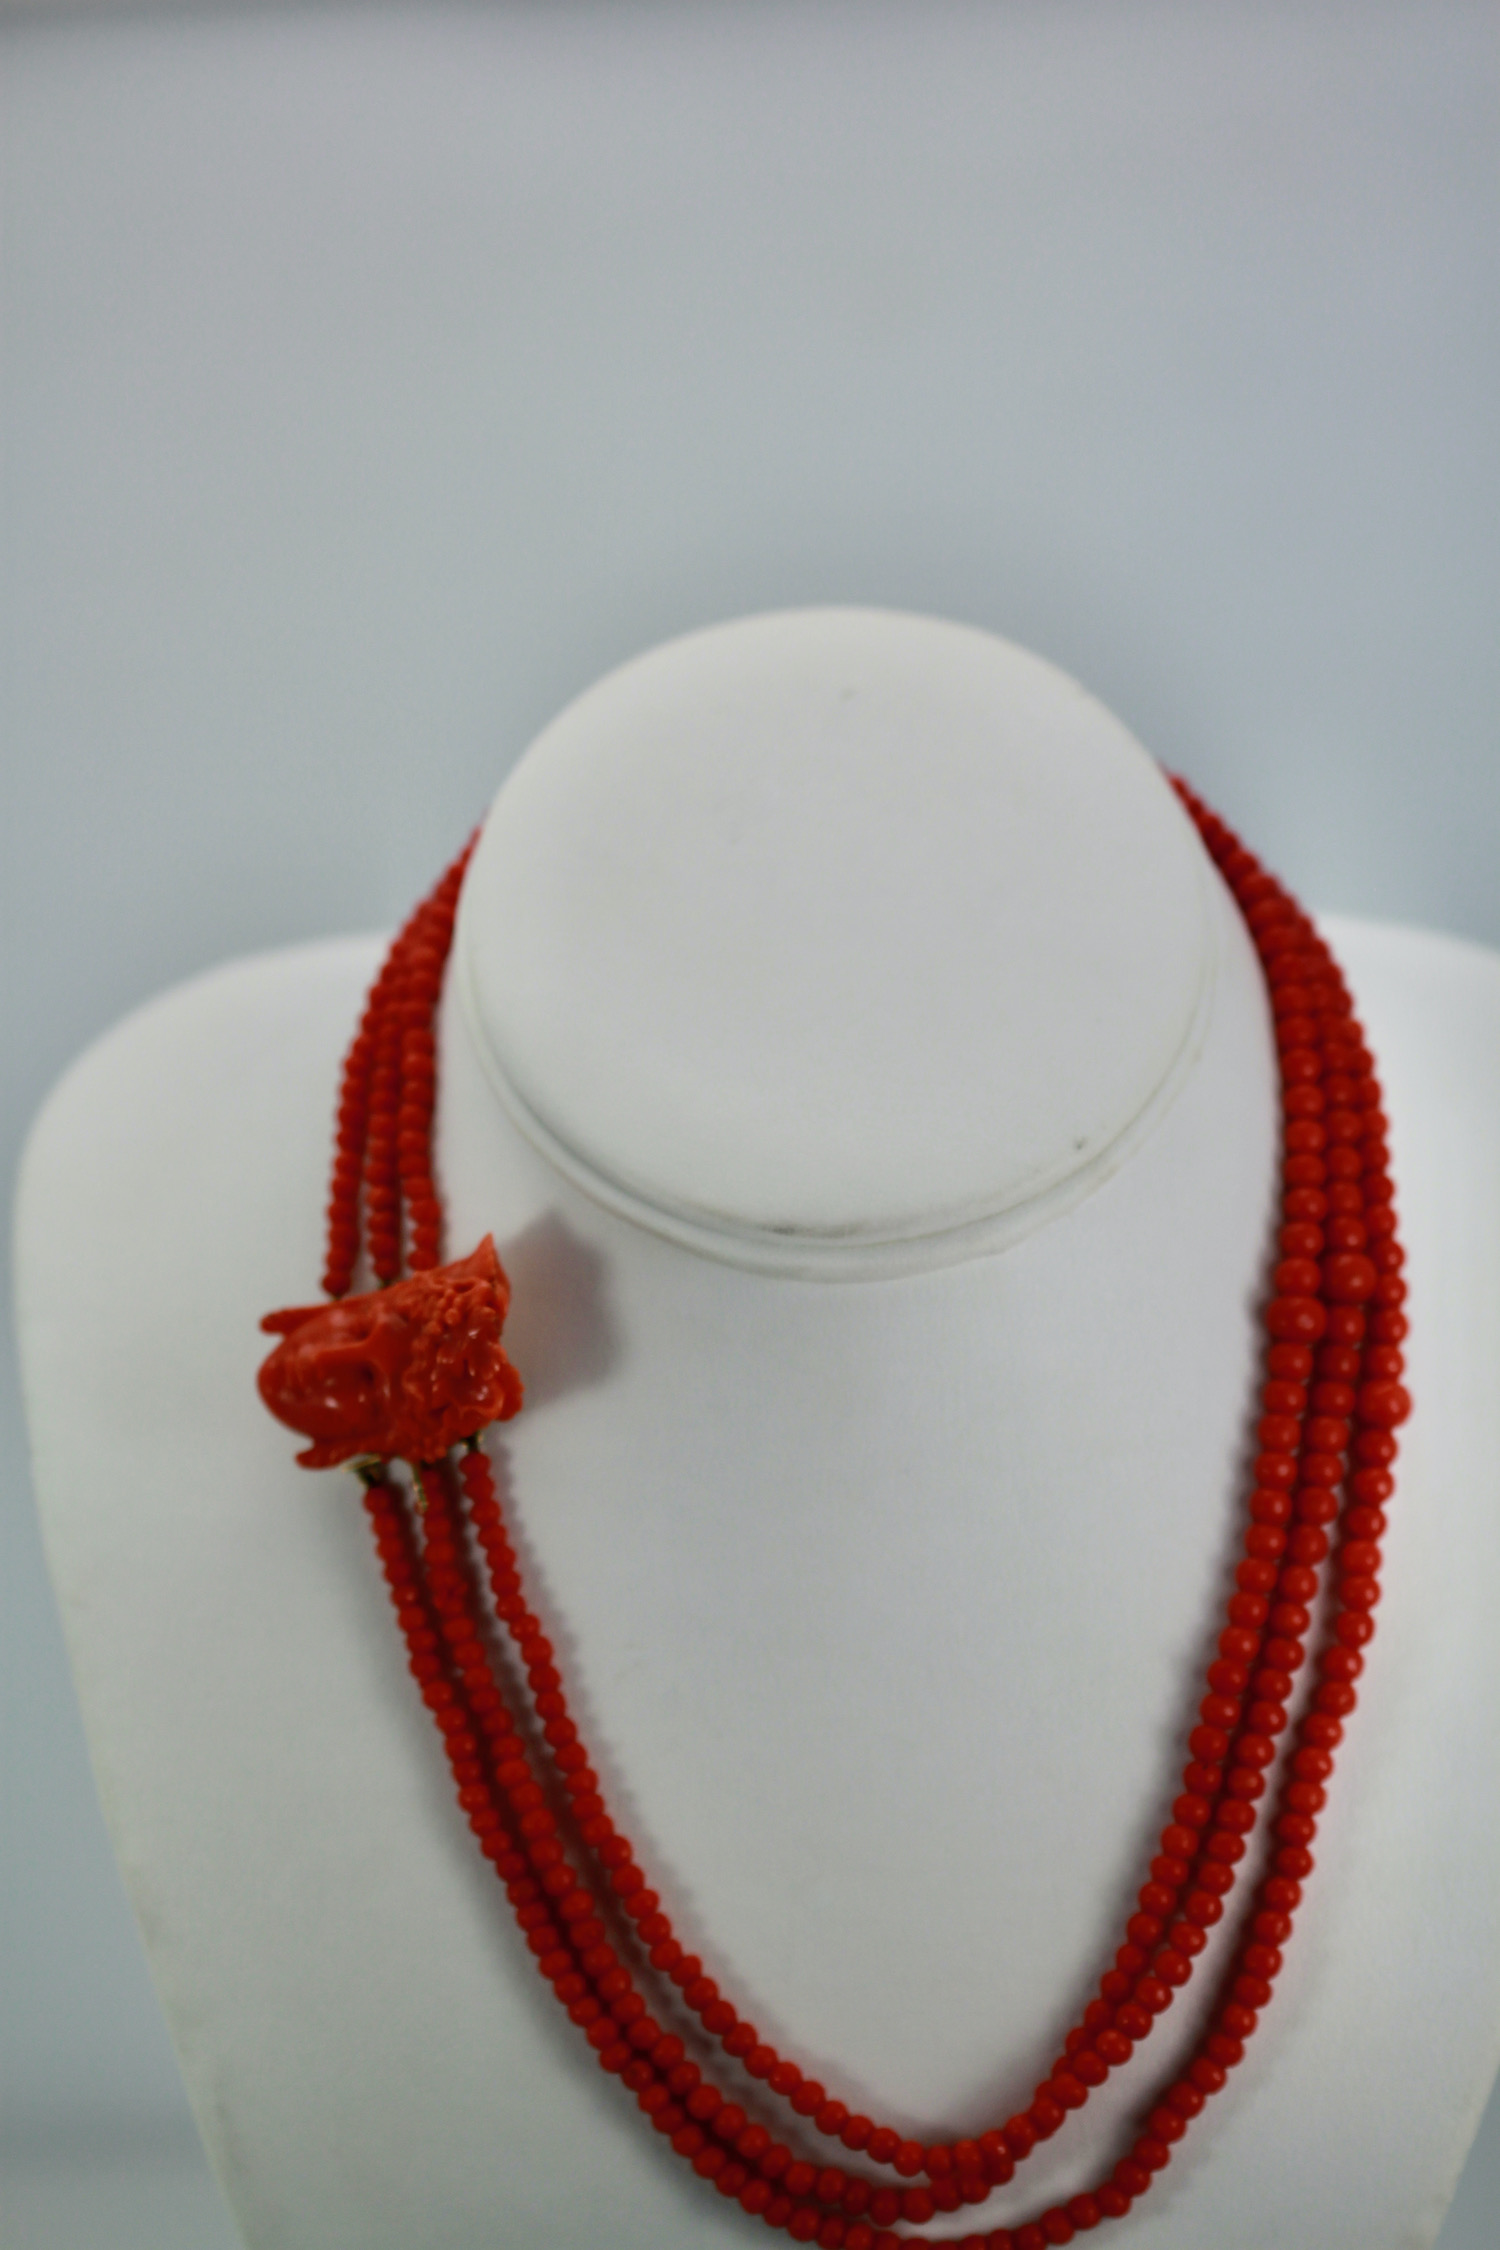 Antique 14K Coral Necklace with Carved Bacchus head